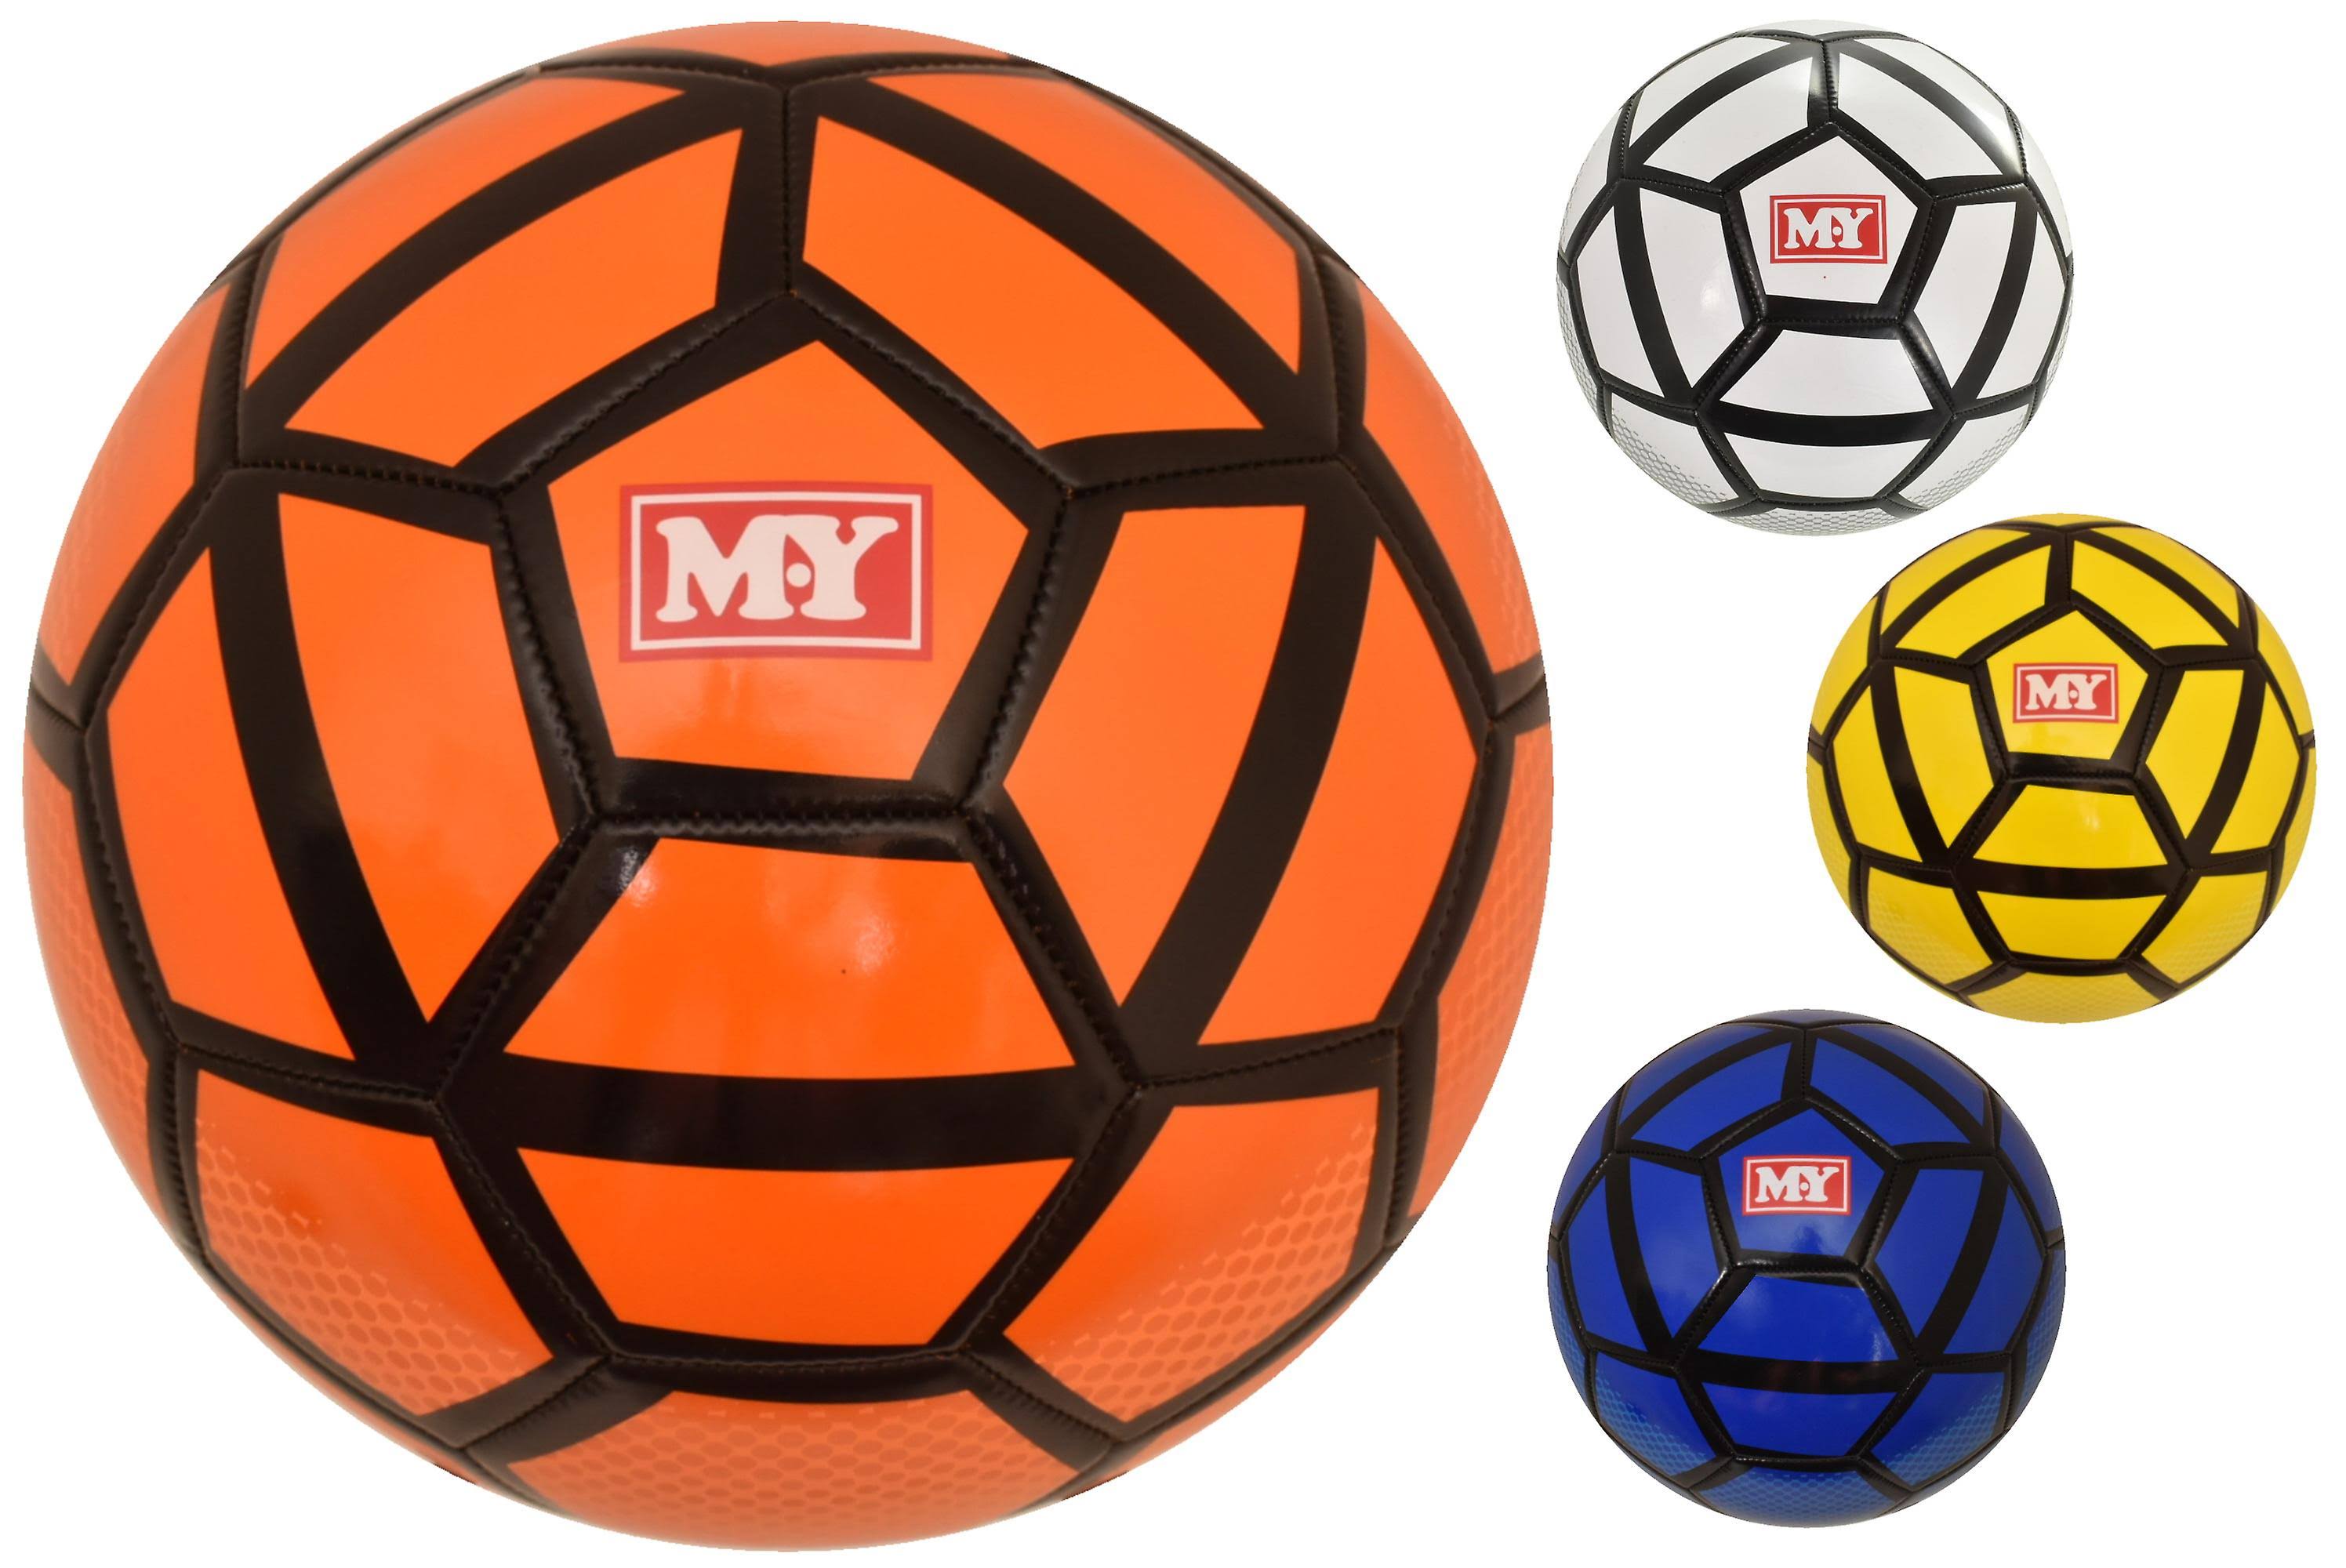 Intex 32 Panel 280g Stitched Neon Premier Football Colour May Vary